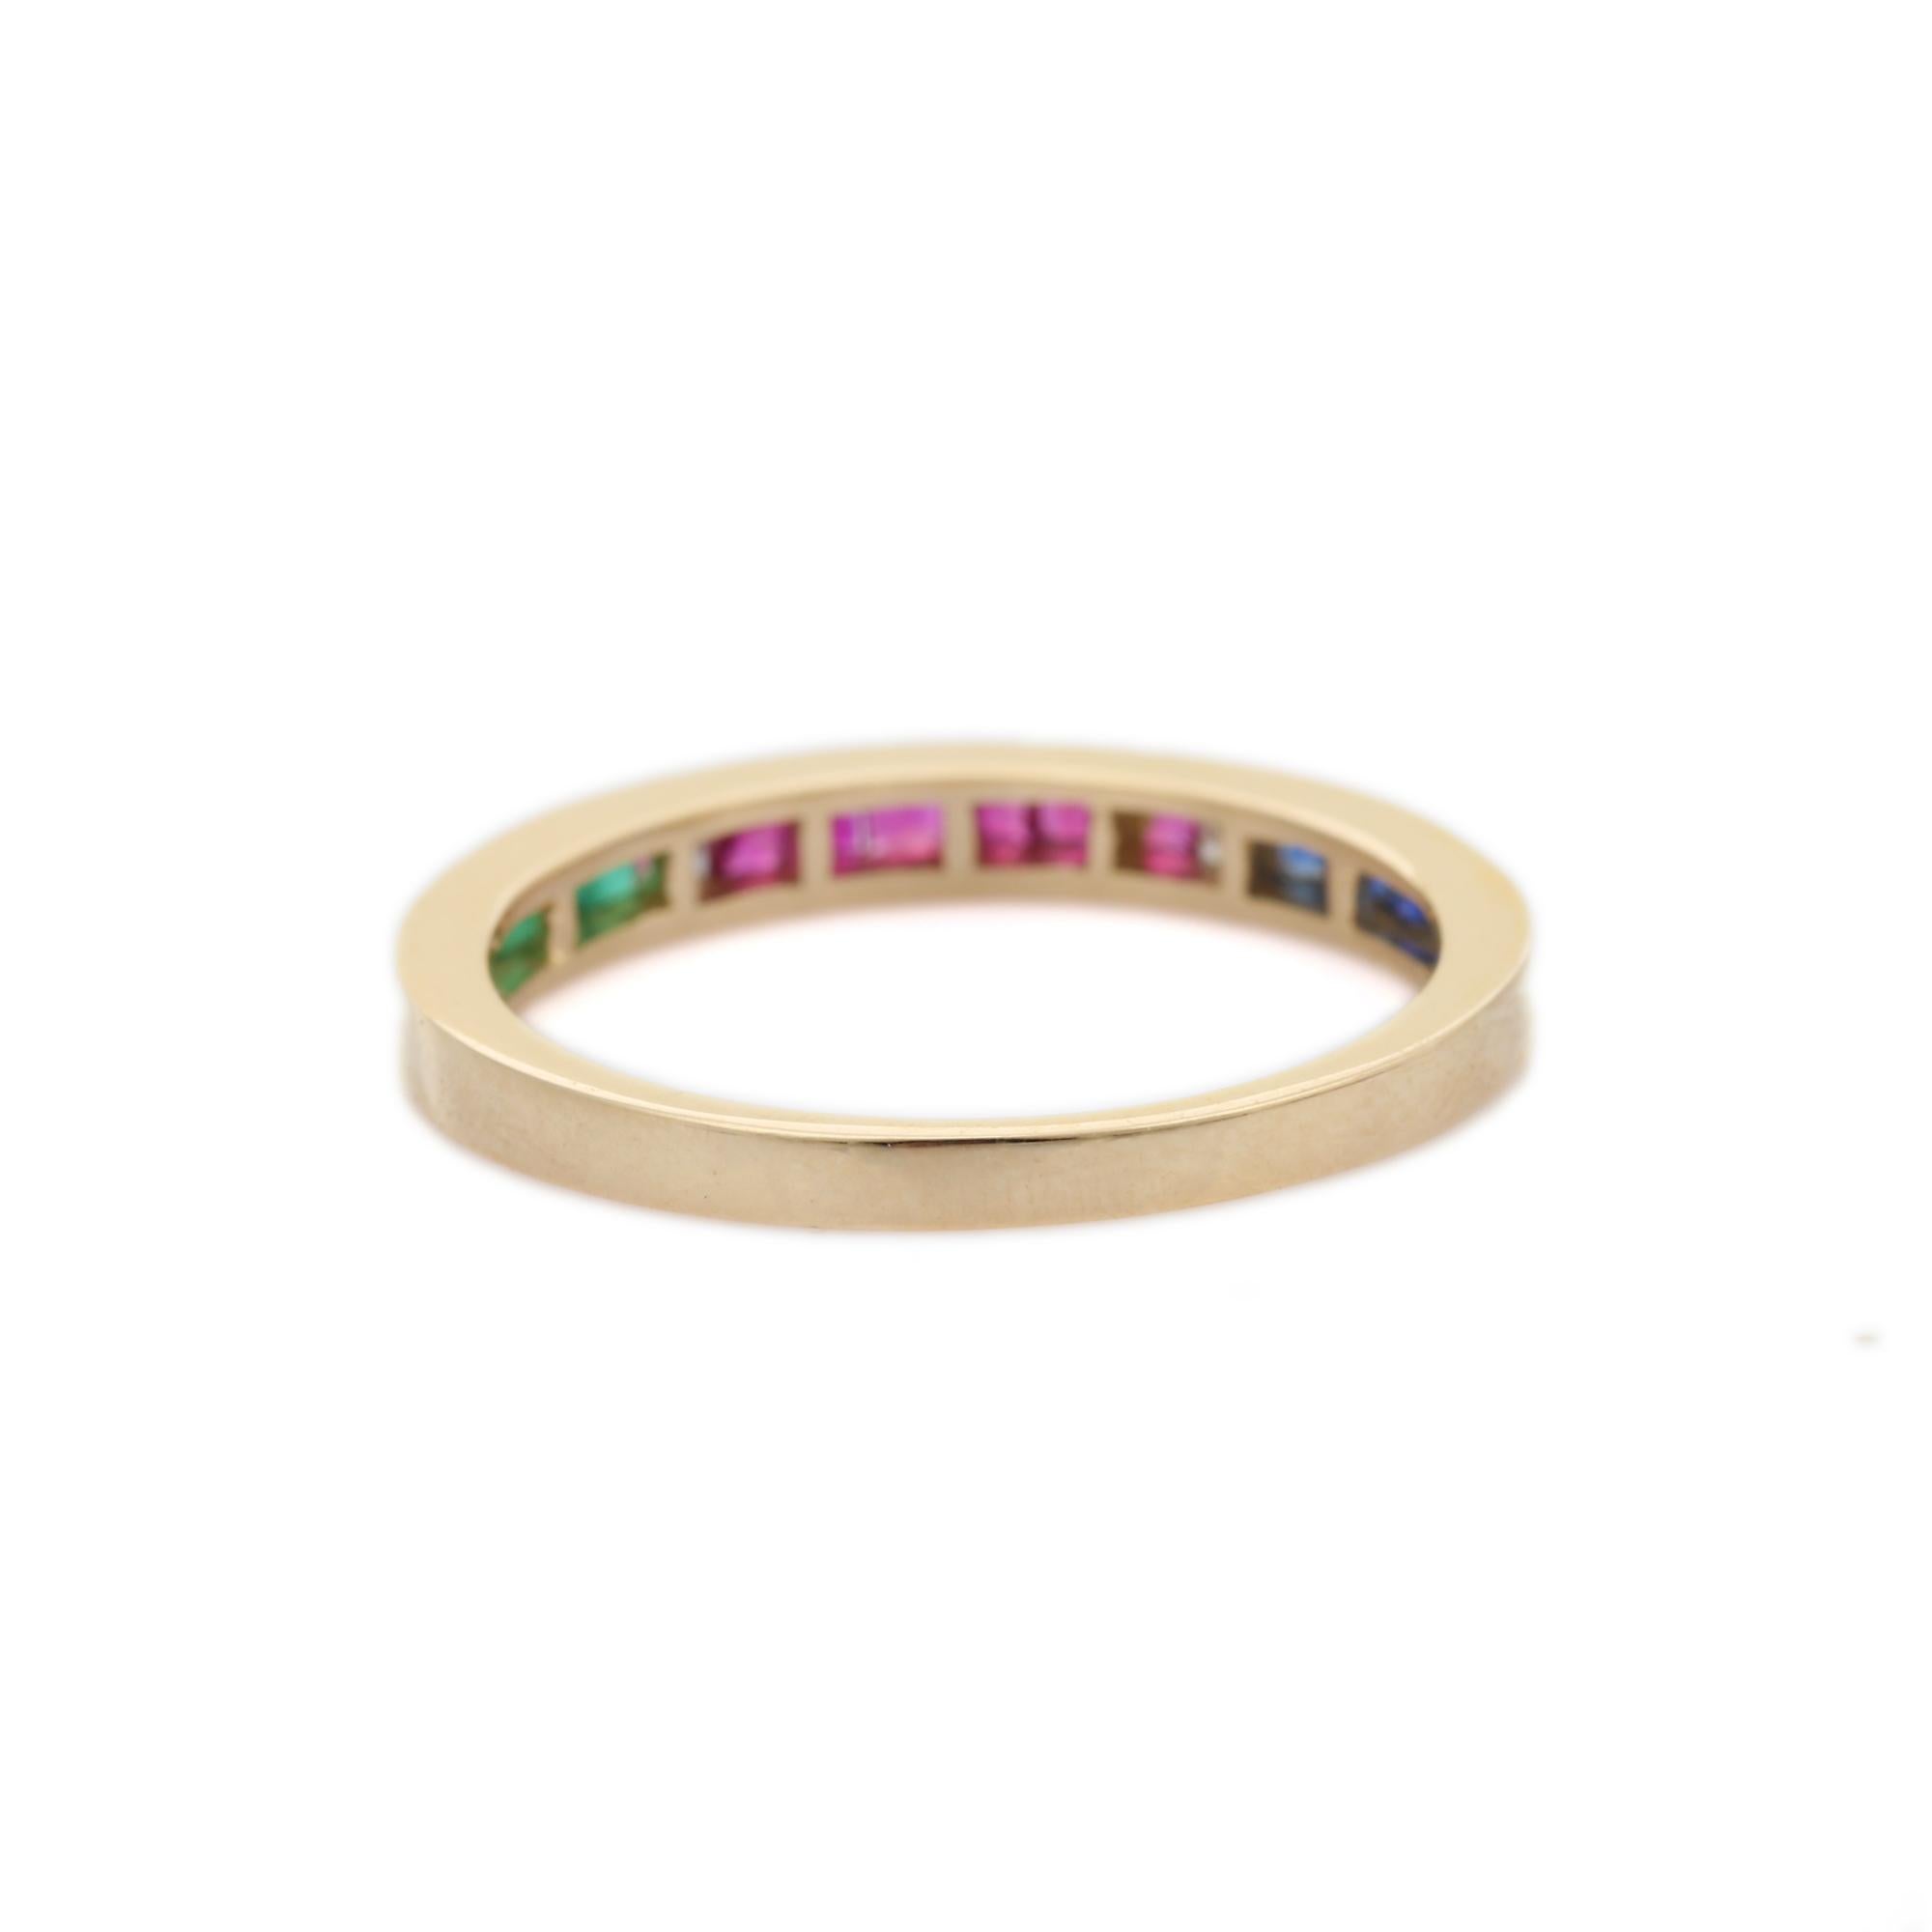 For Sale:  Stackable Emerald, Ruby and Sapphire Band Ring in 14k Solid Yellow Gold 4